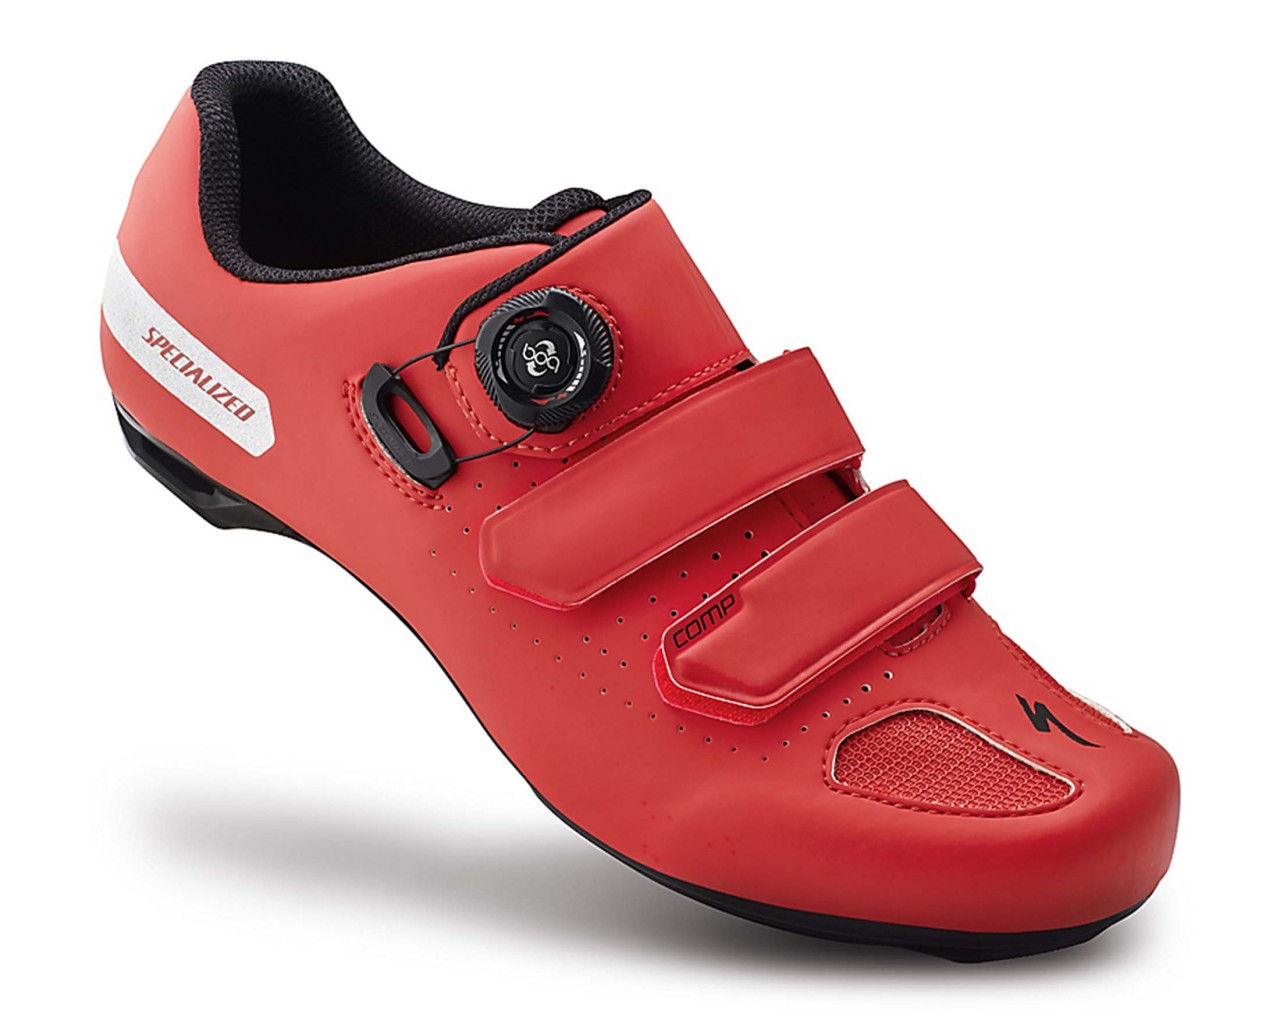 Specialized Comp Road Road Bike Shoes | rocket red